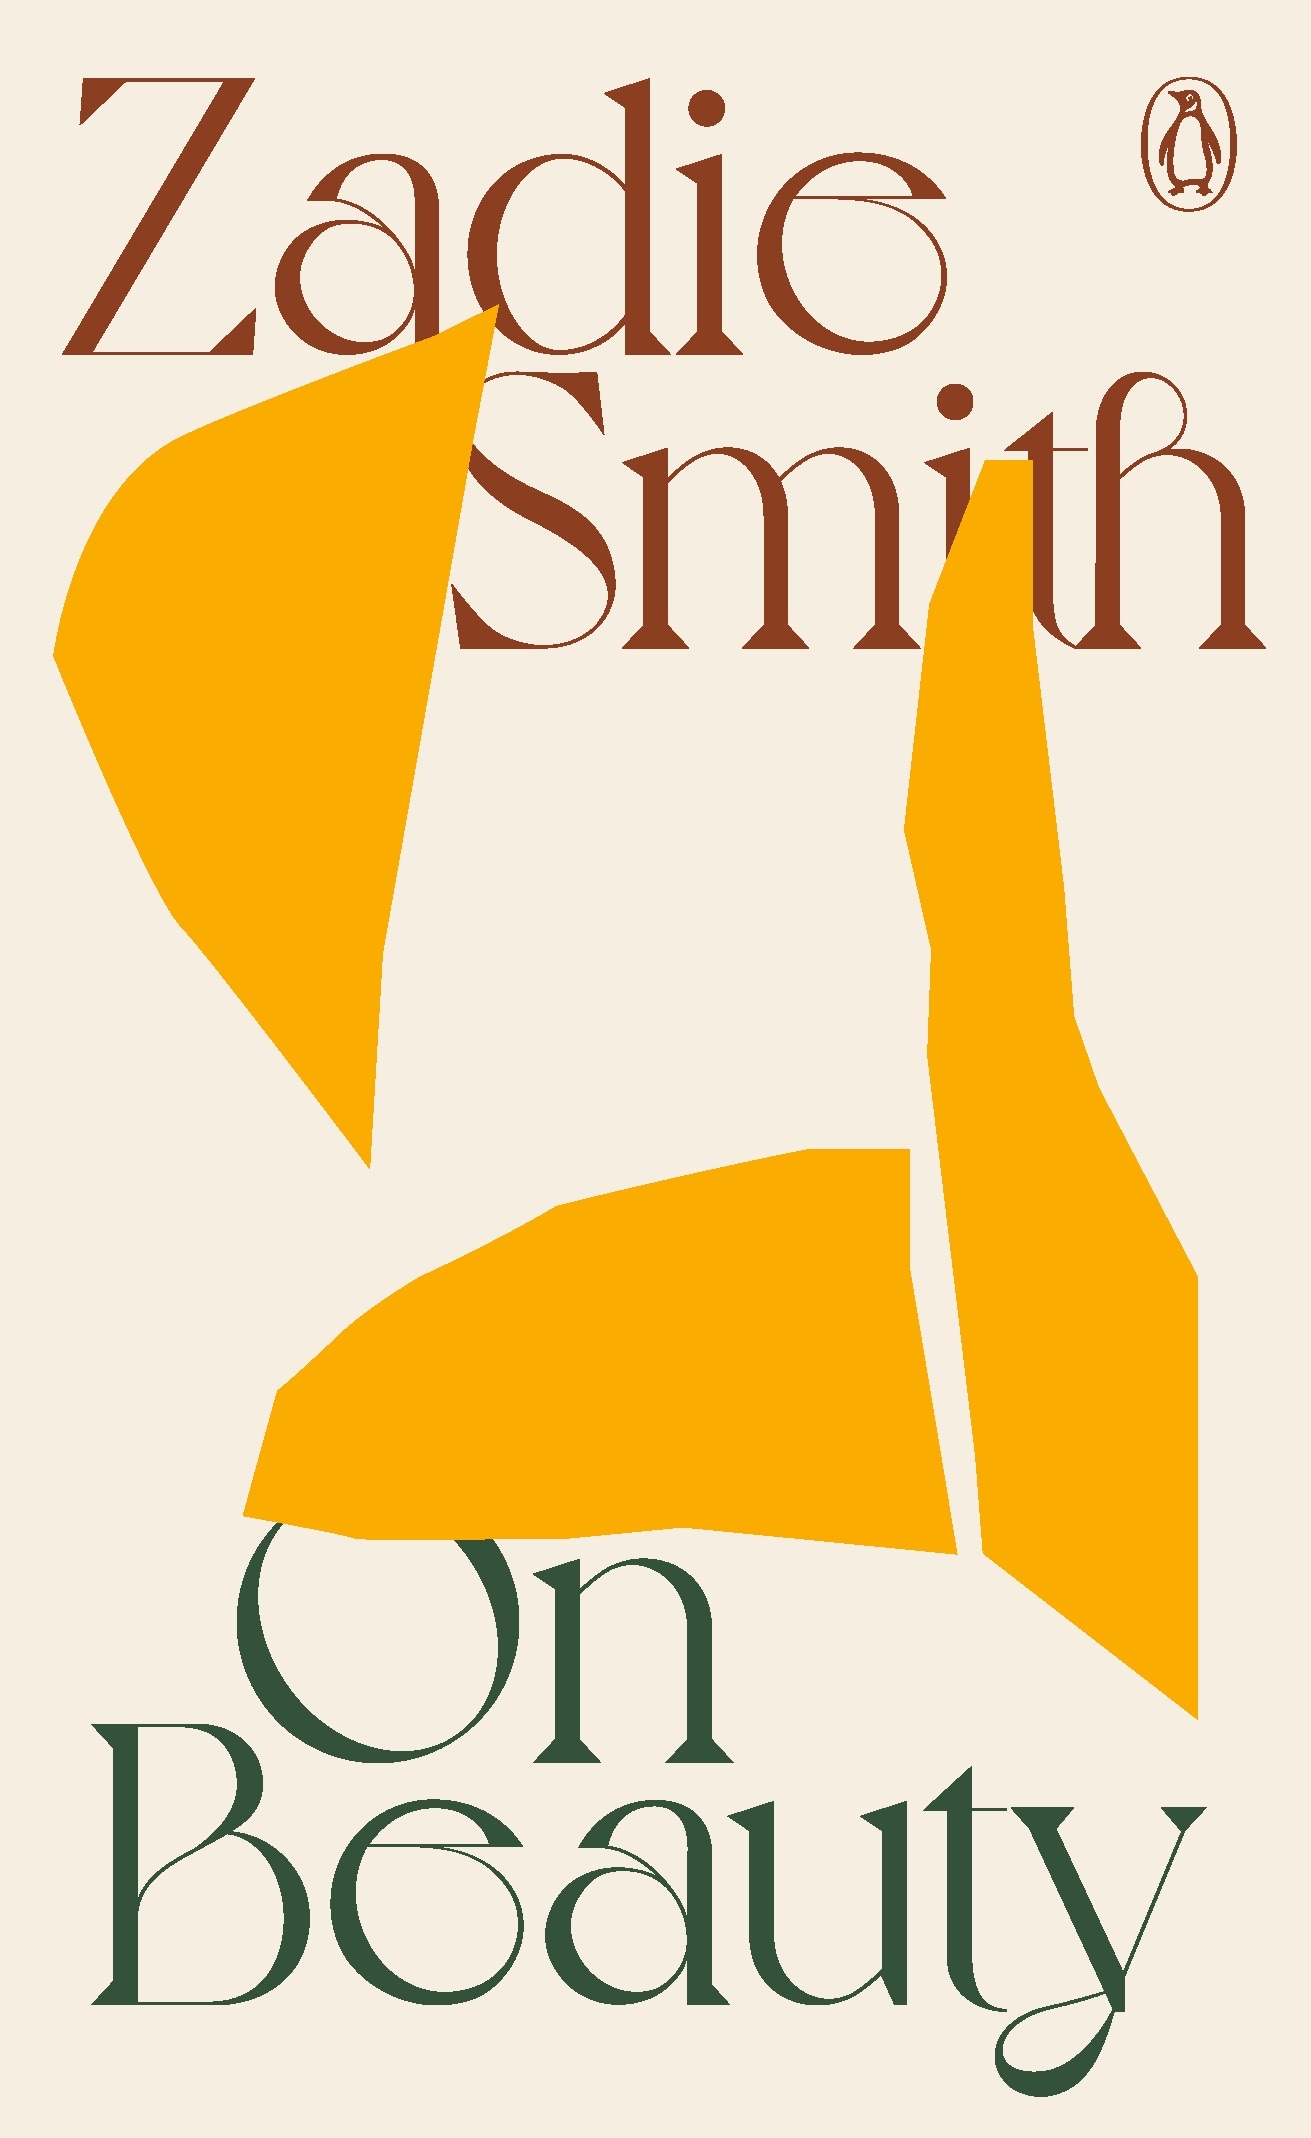 Book “On Beauty” by Zadie Smith — July 23, 2020